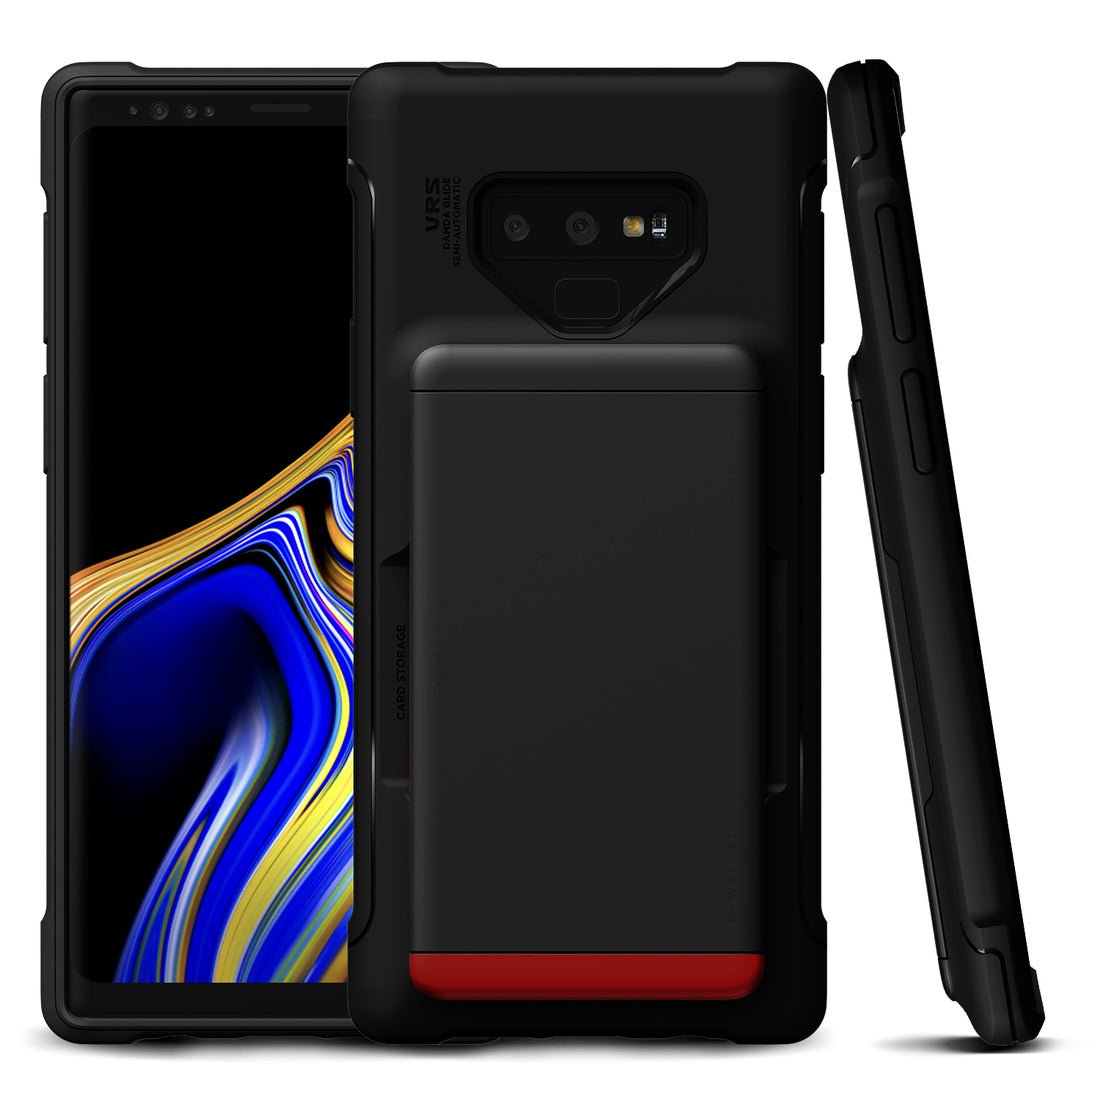 Samsung Galaxy Note 9 Plus wallet rugged case with multiple durable and convenient card slot with sleek minimalism by VRS